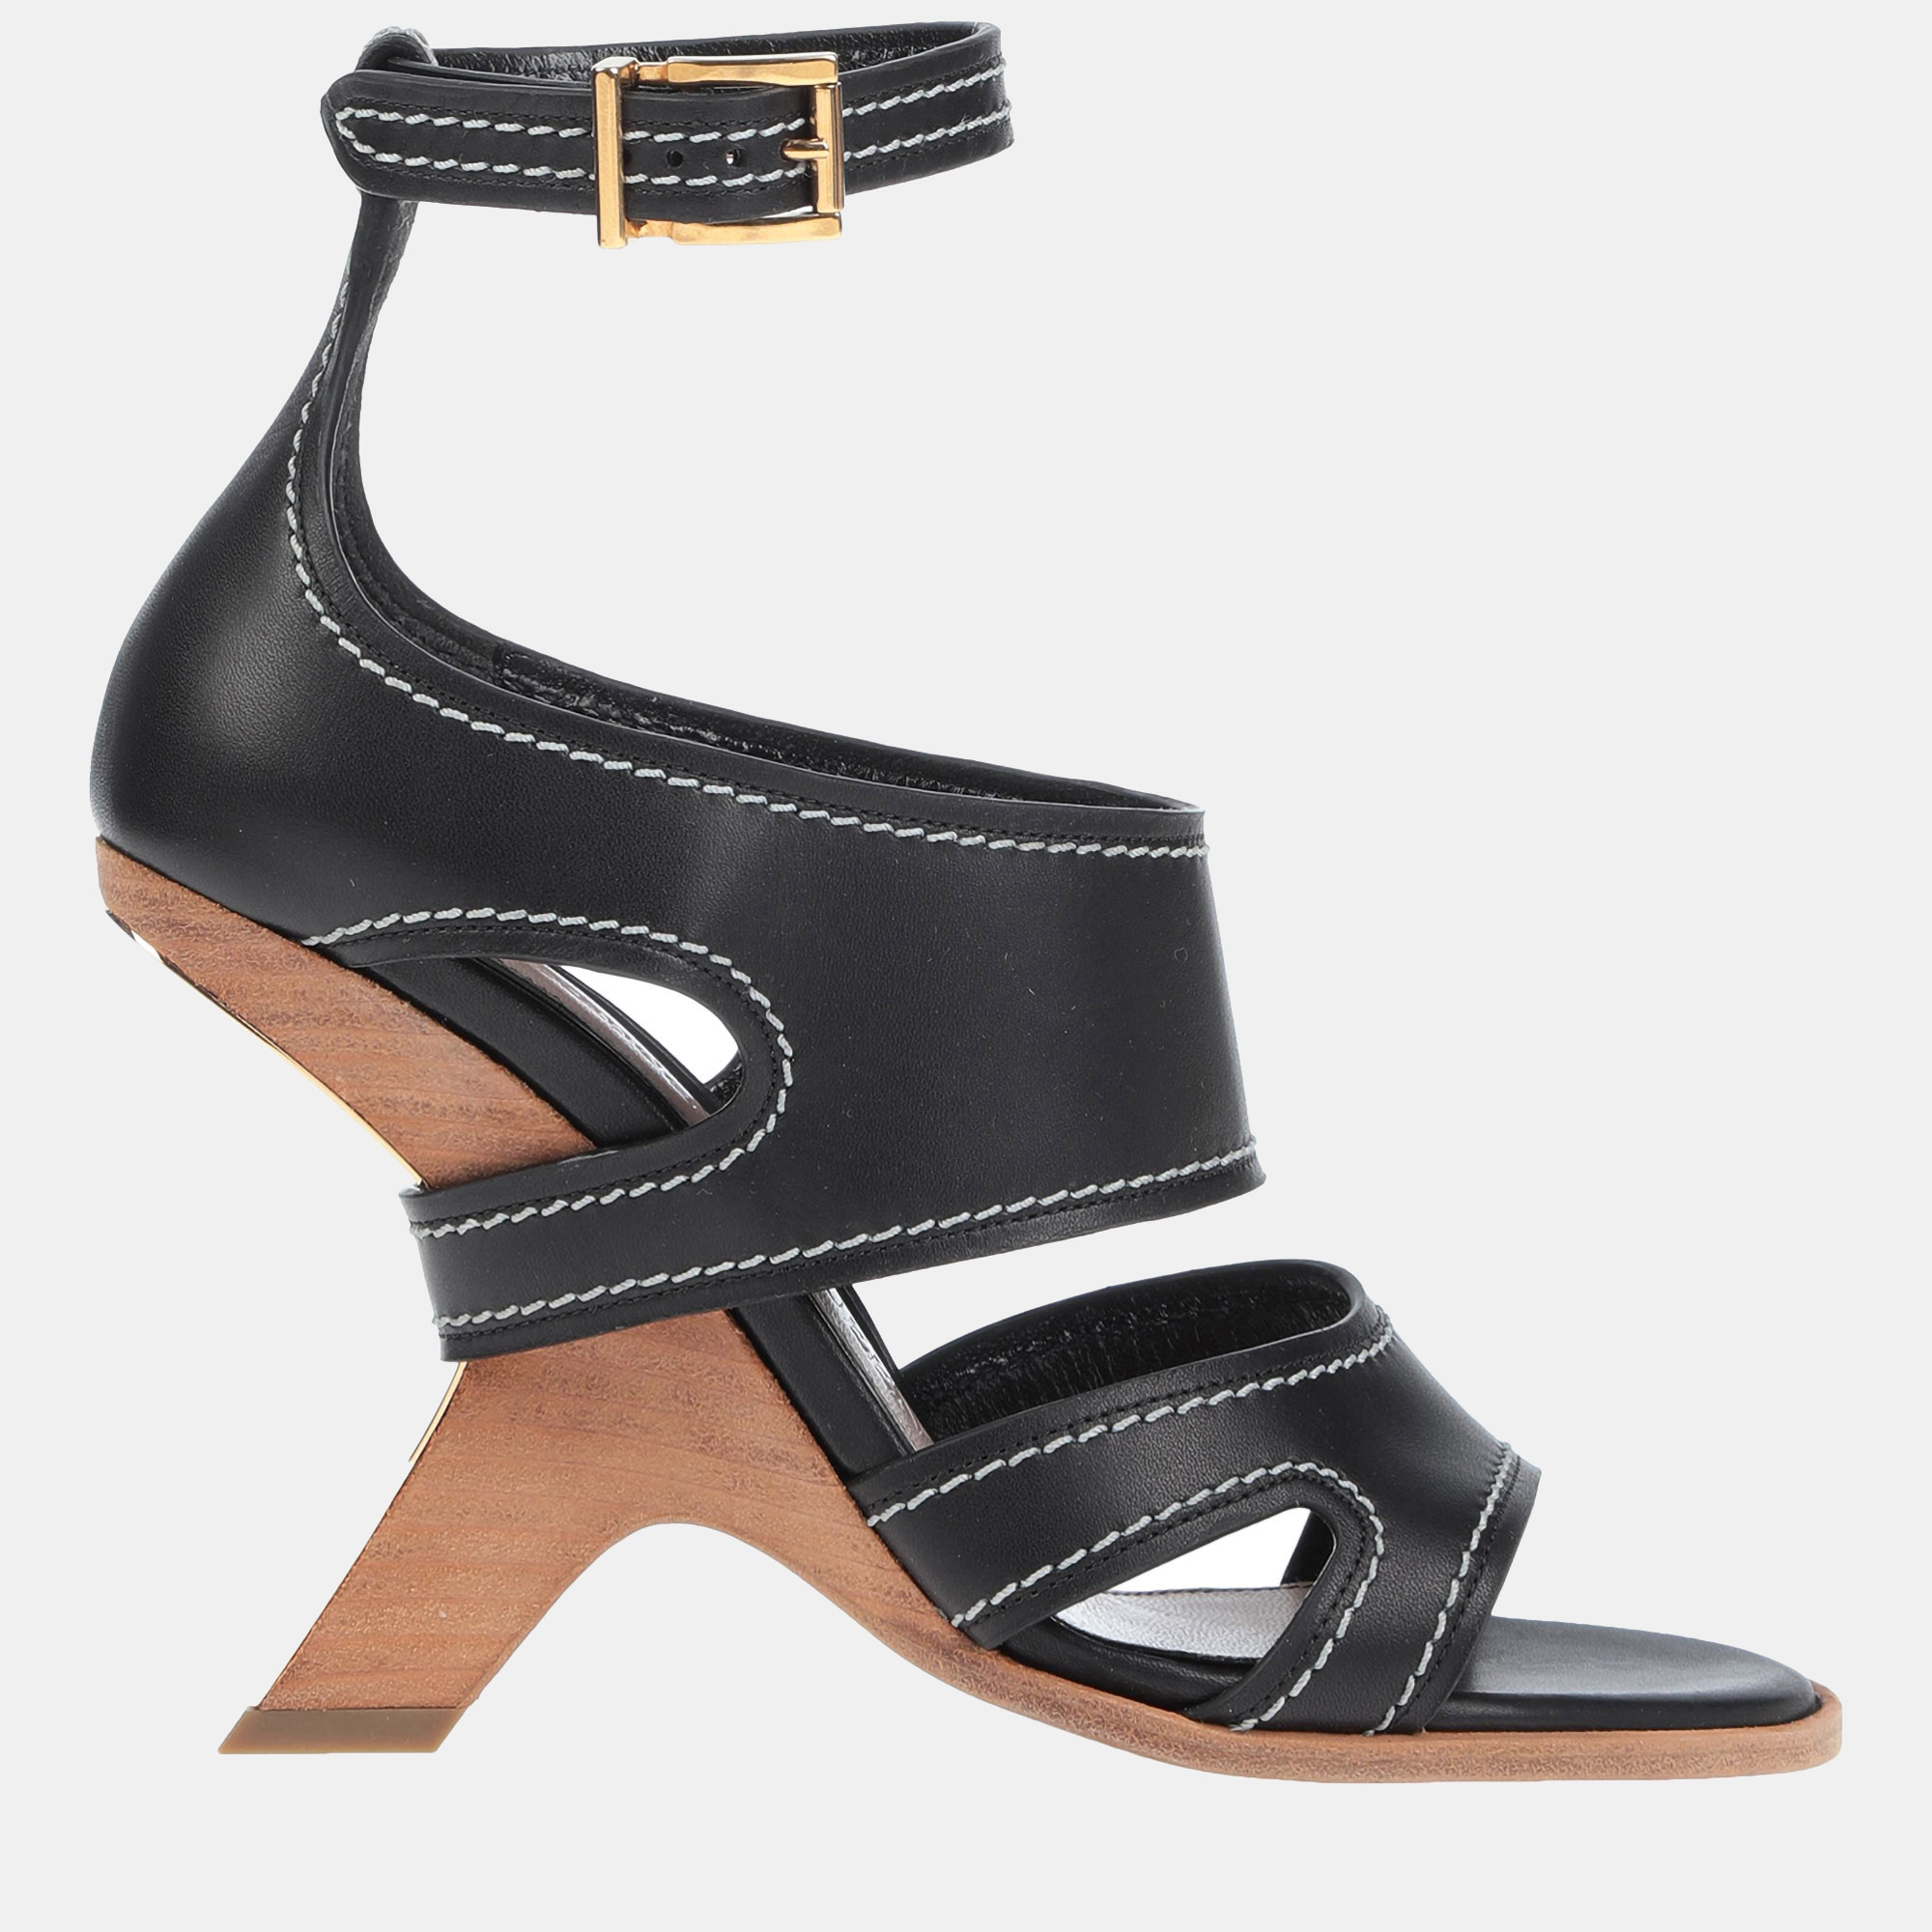 Alexander McQueen Leather Ankle Strap Sandals 38